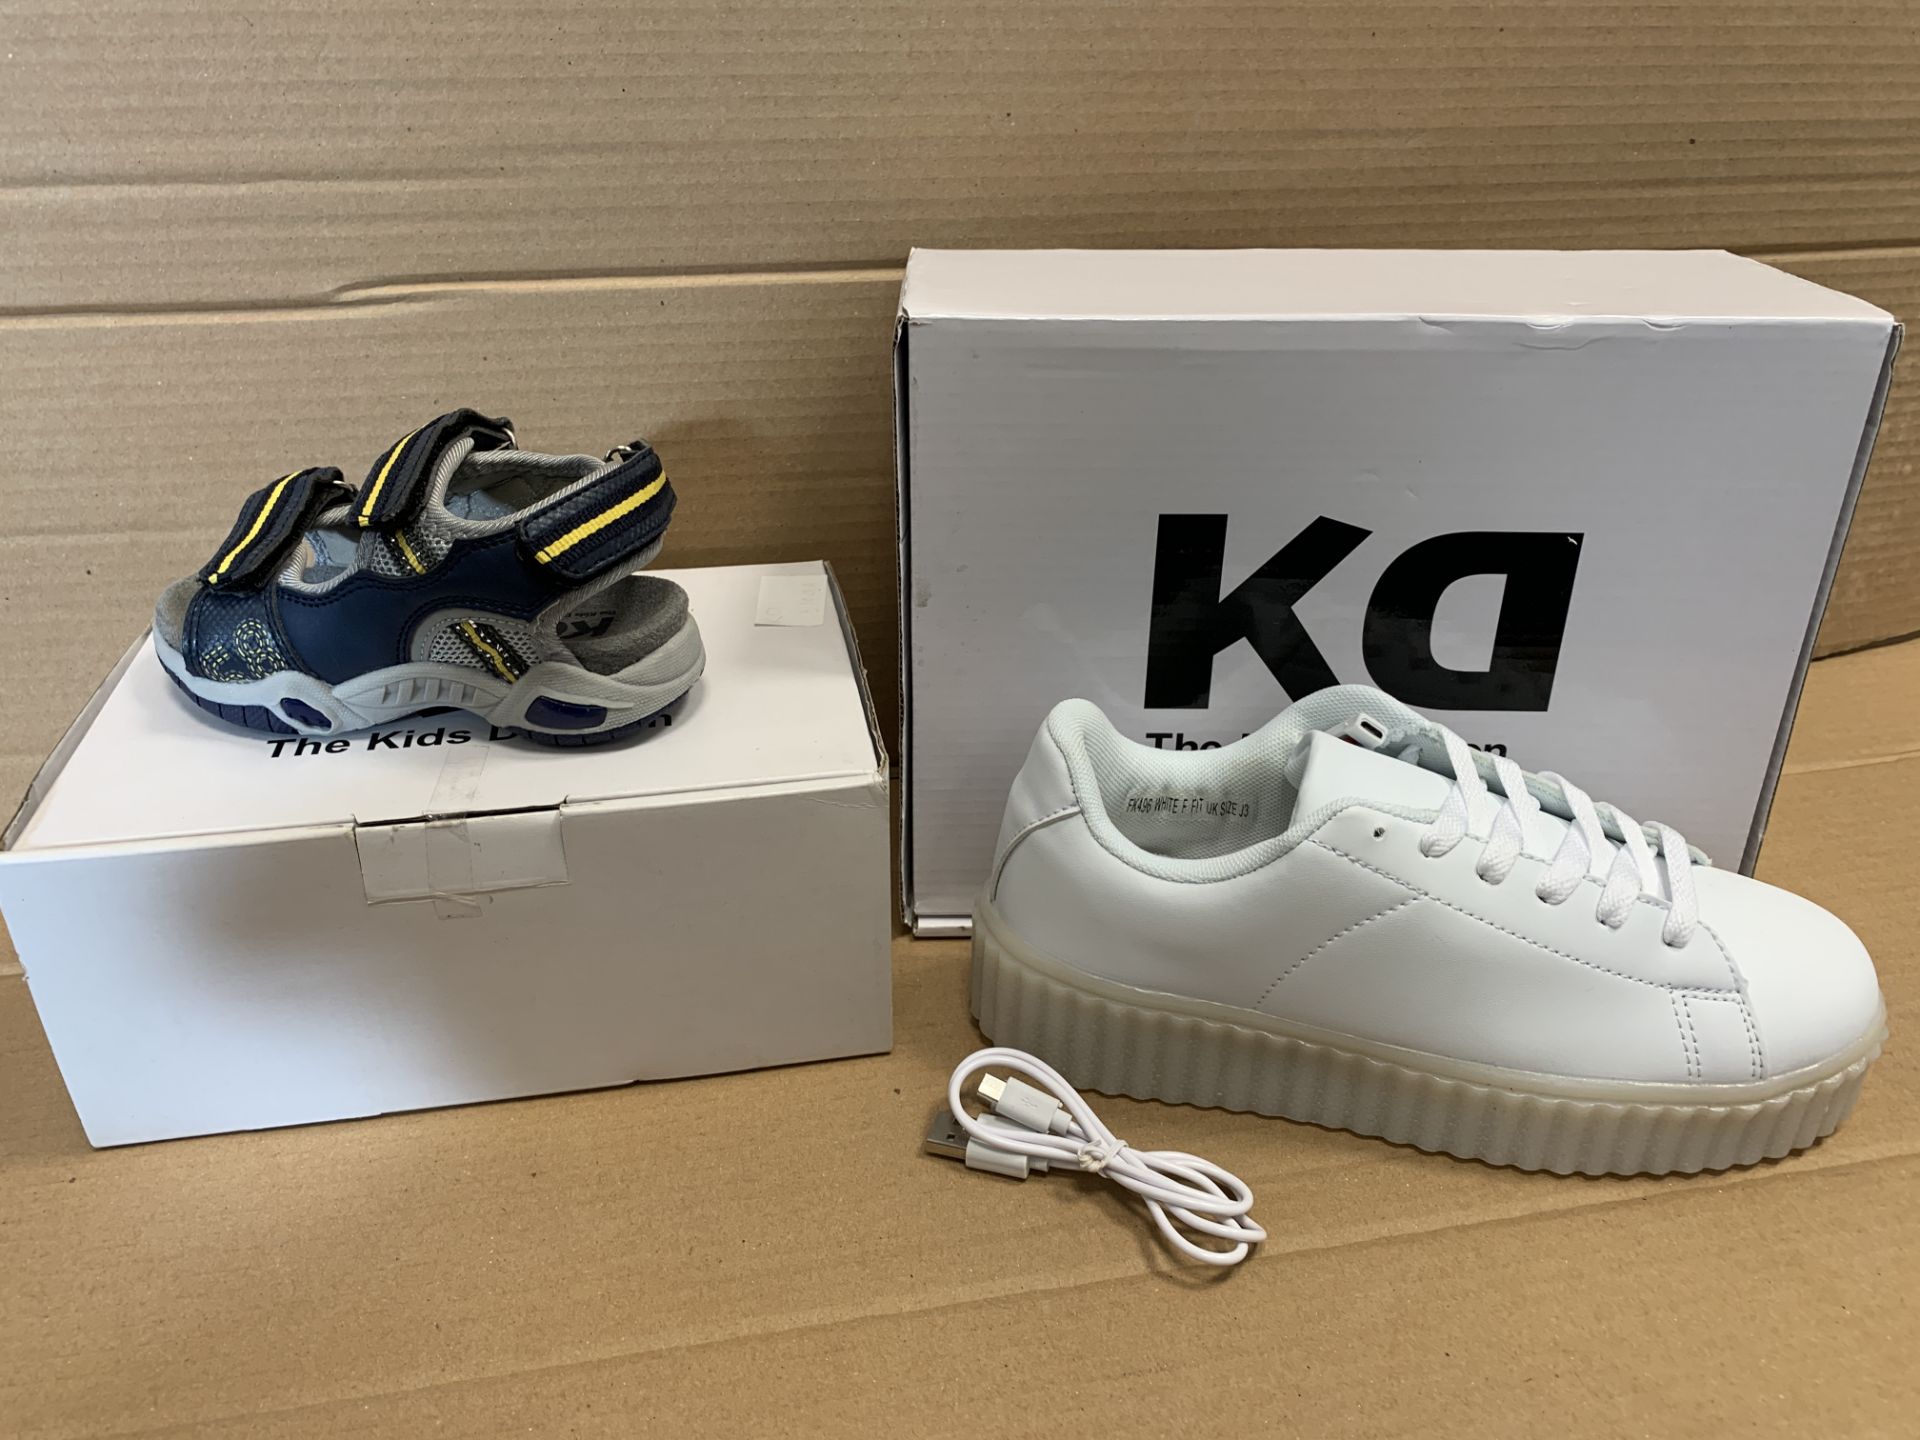 (NO VAT) 10 X BRAND NEW ASSORTED KD( THE KIDS DIVISION) CHILDRENS FOOTWEAR IN VARIOUS SIZES